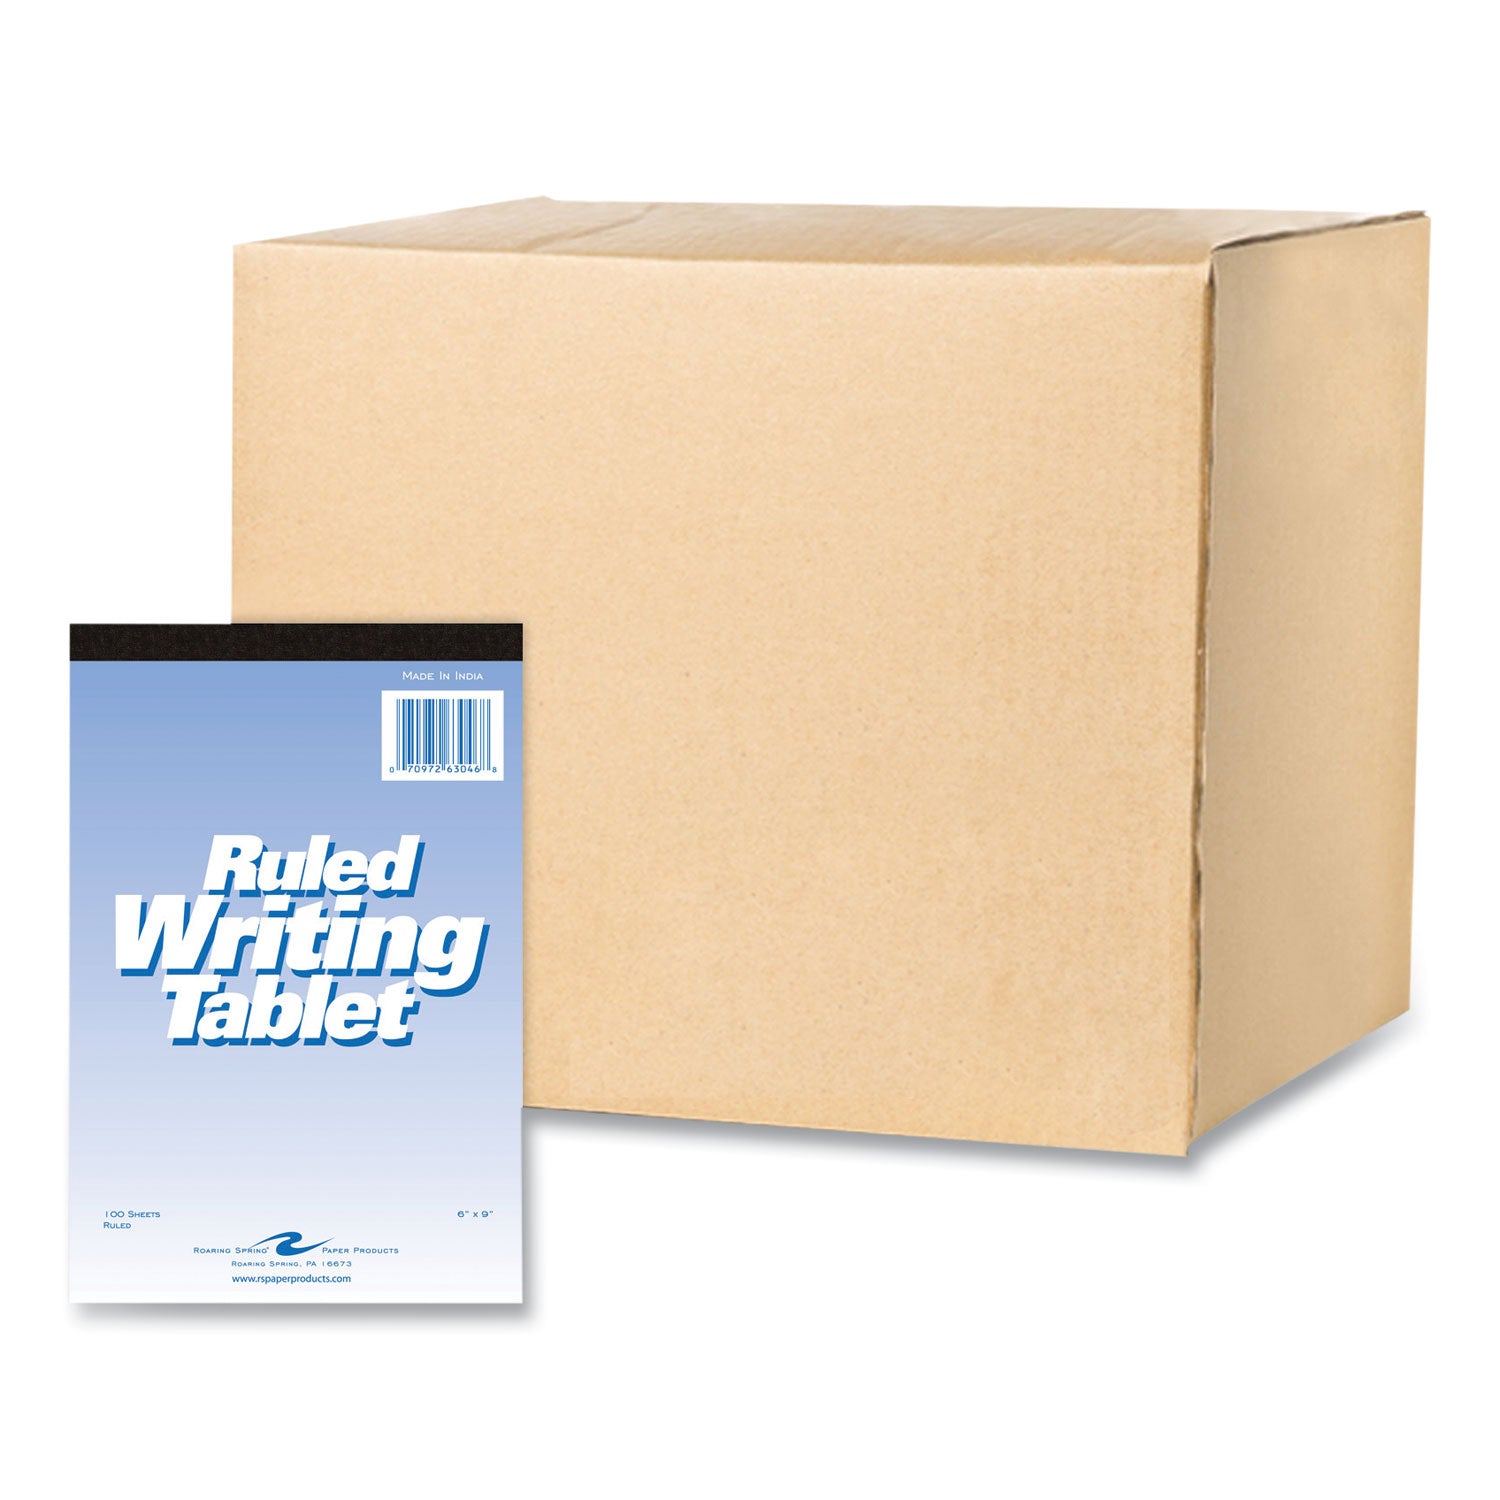 writing-tablet-wide-legal-rule-100-white-6-x-9-sheets-48-carton-ships-in-4-6-business-days_roa63046cs - 1